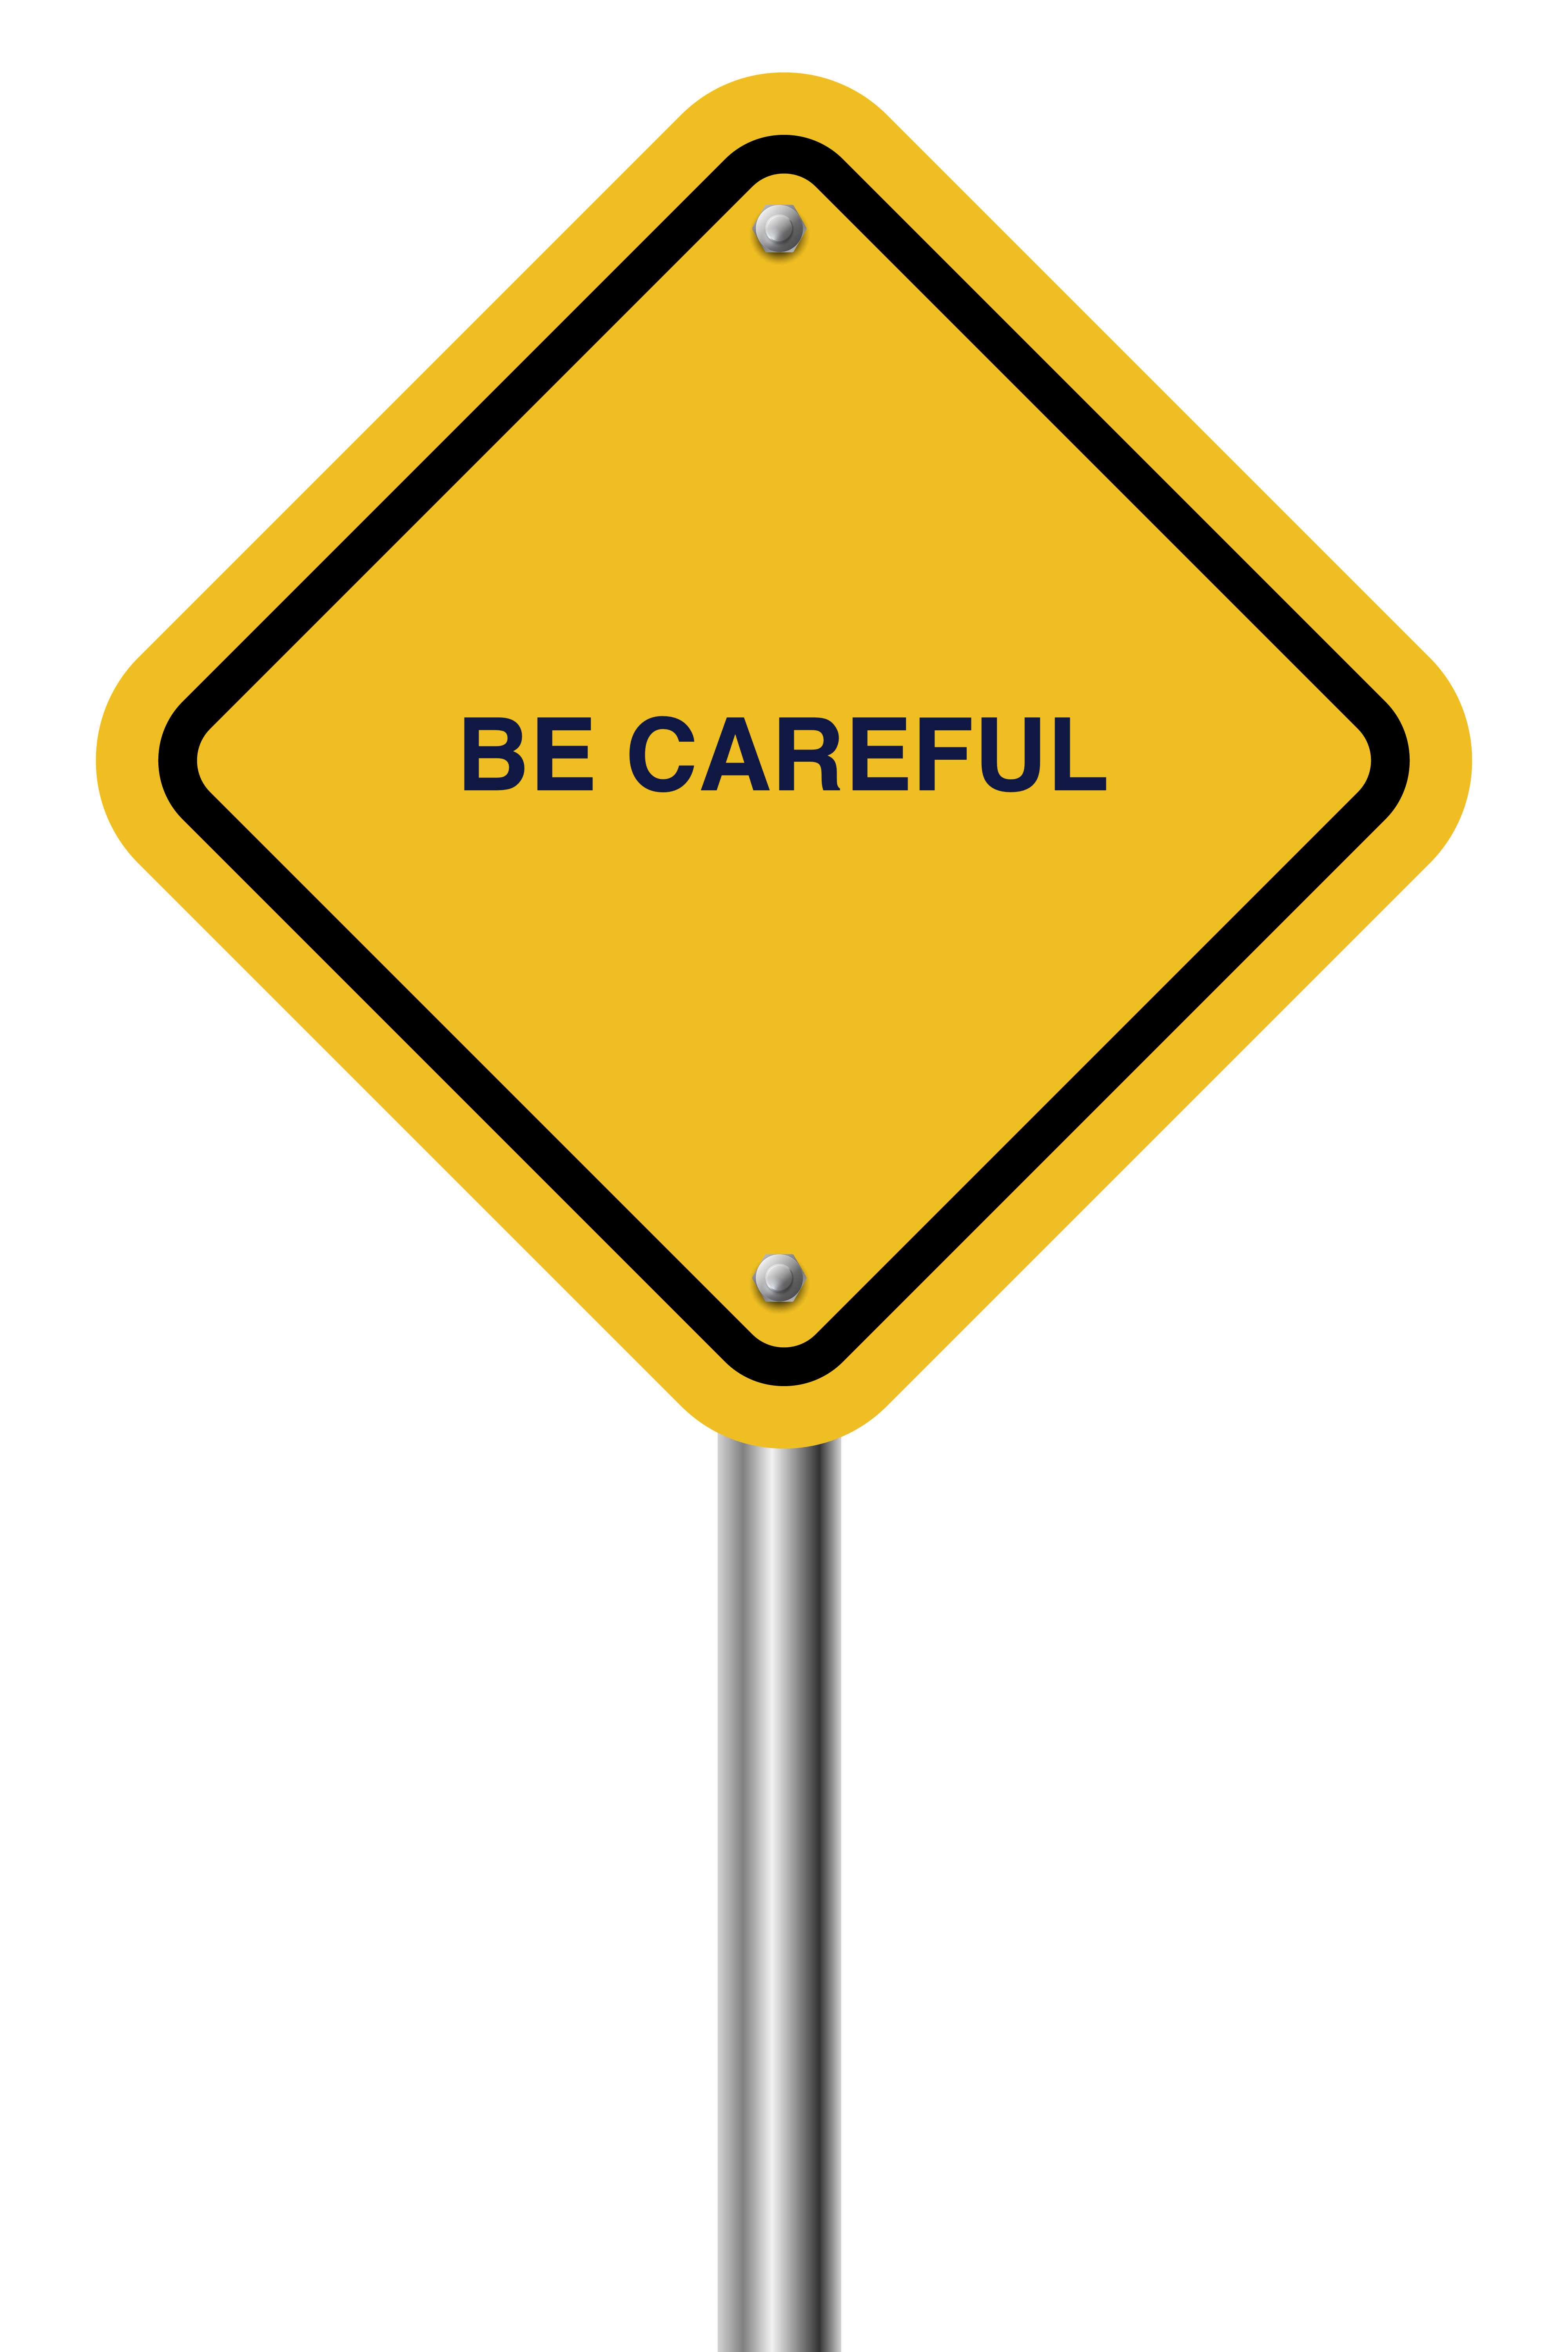 Blank diamond shaped warning yellow sign isolated on white background. - NewSprout